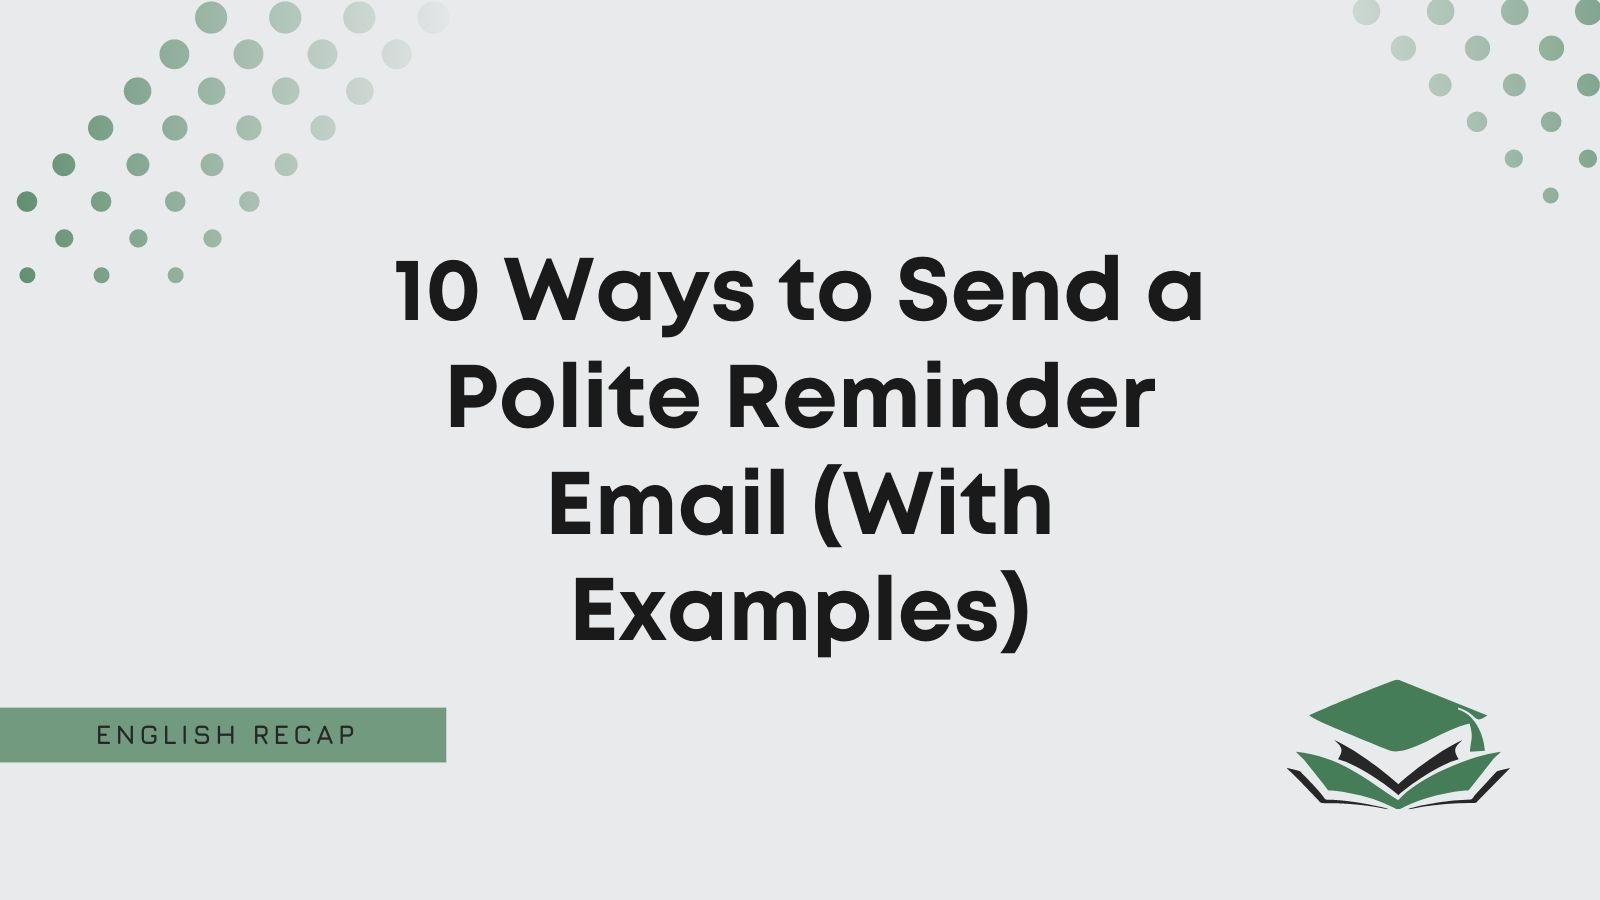 10 Ways to Send a Polite Reminder Email (With Examples) - English Recap